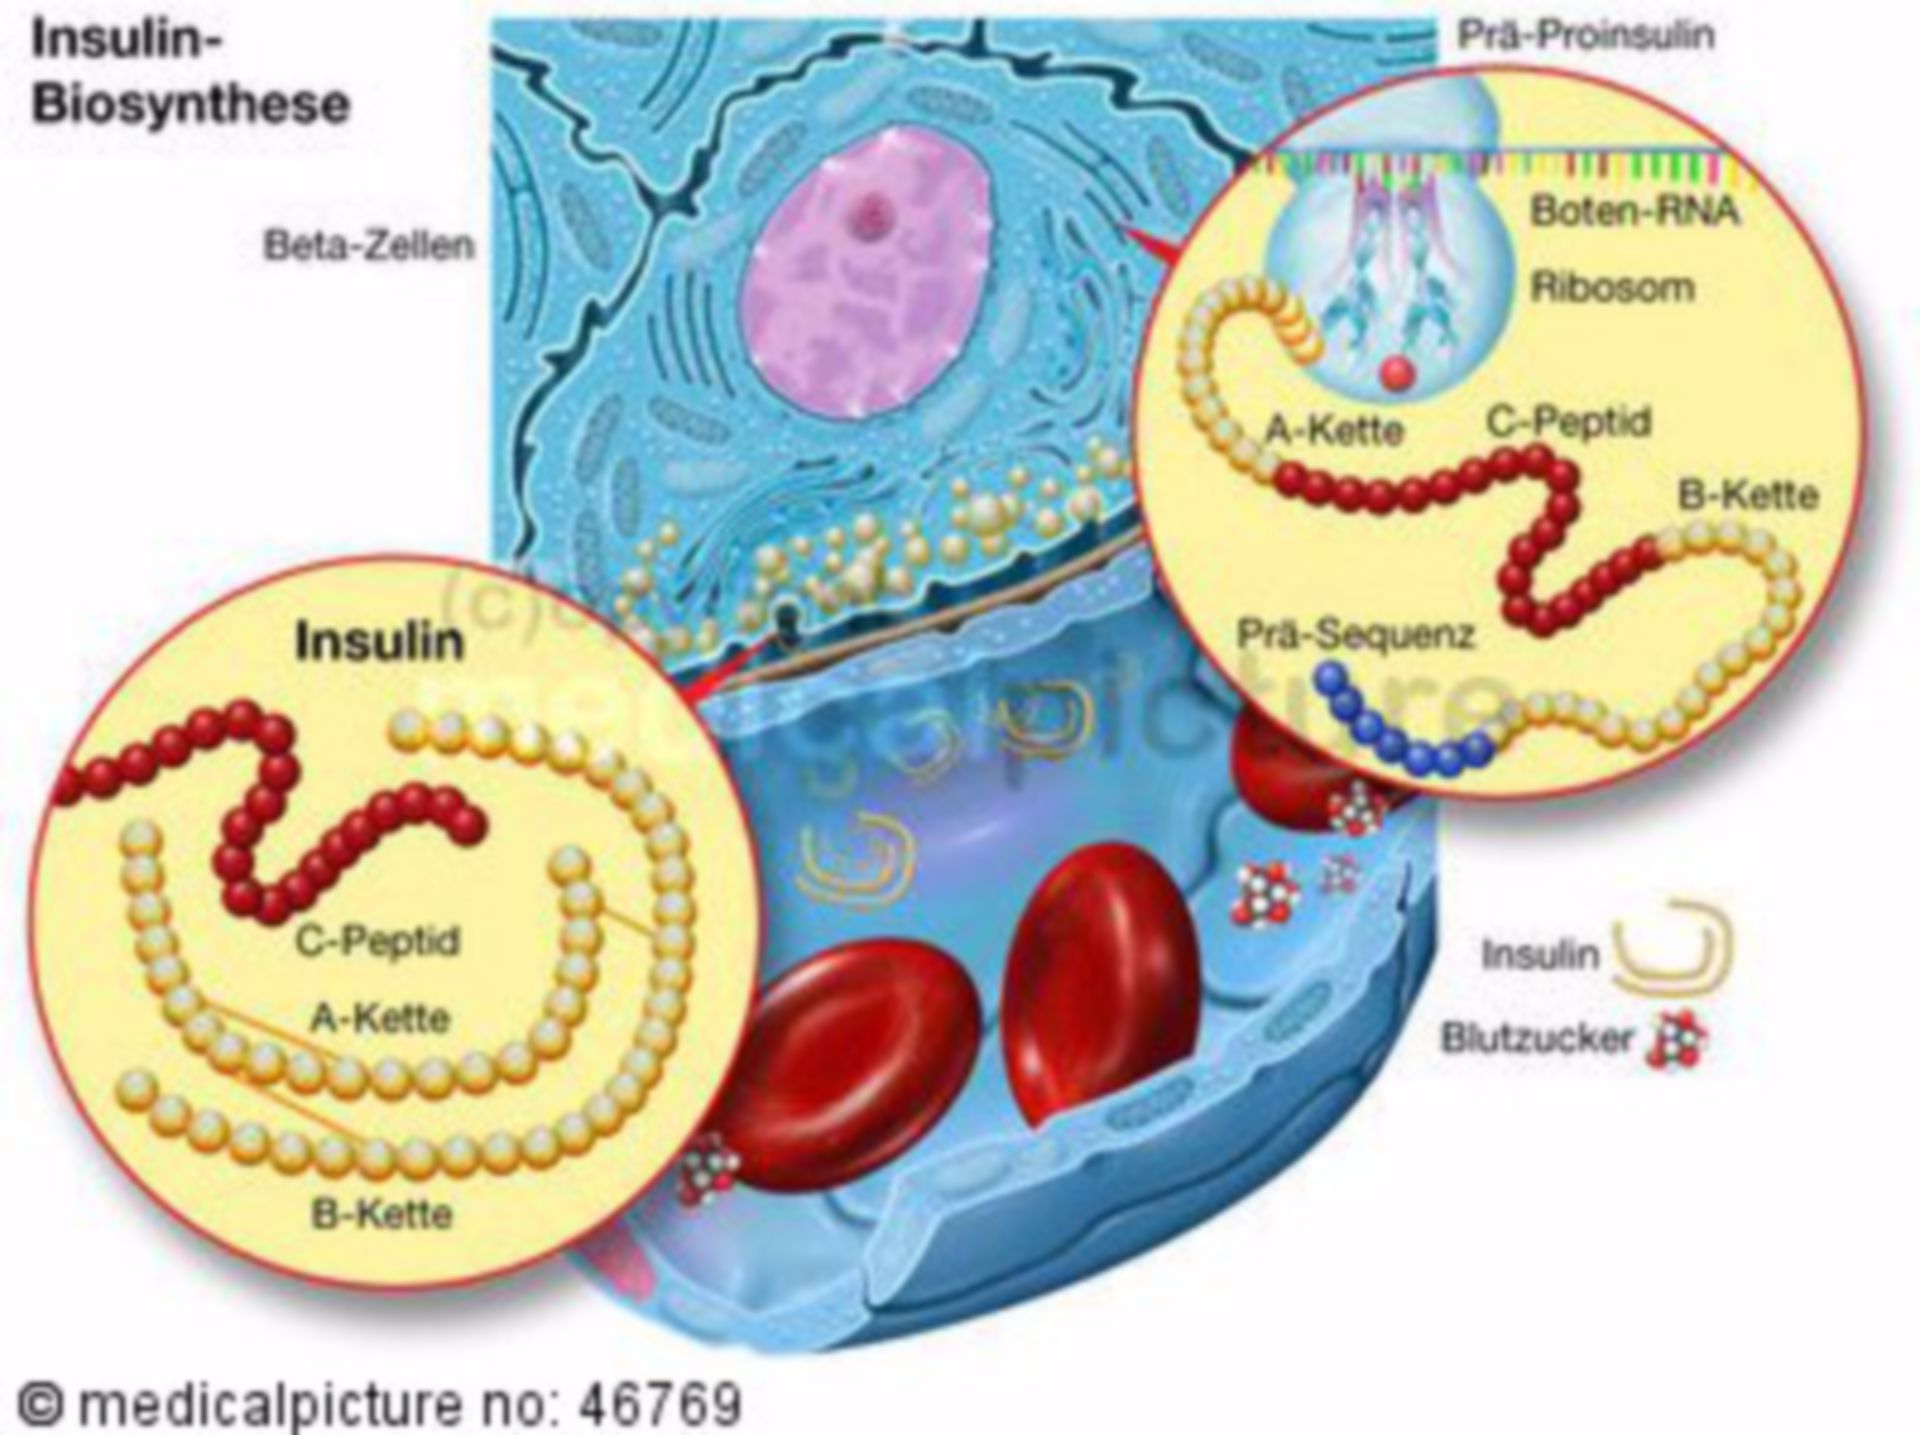 Insulin biosynthesis of the healthy Beta cell